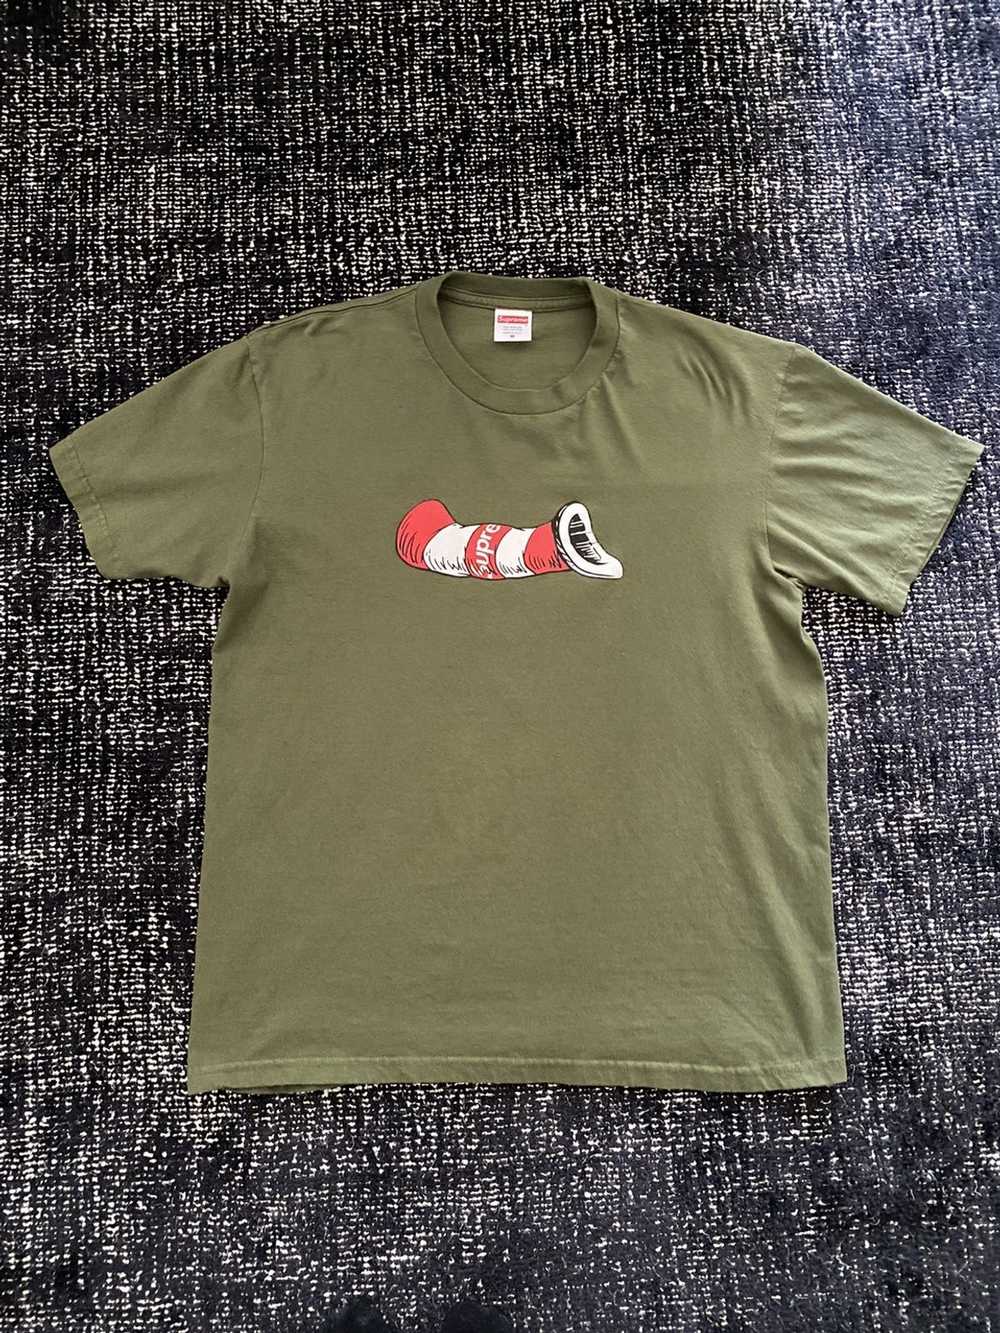 Supreme Supreme Cat in the Hat Olive Tee M - image 1